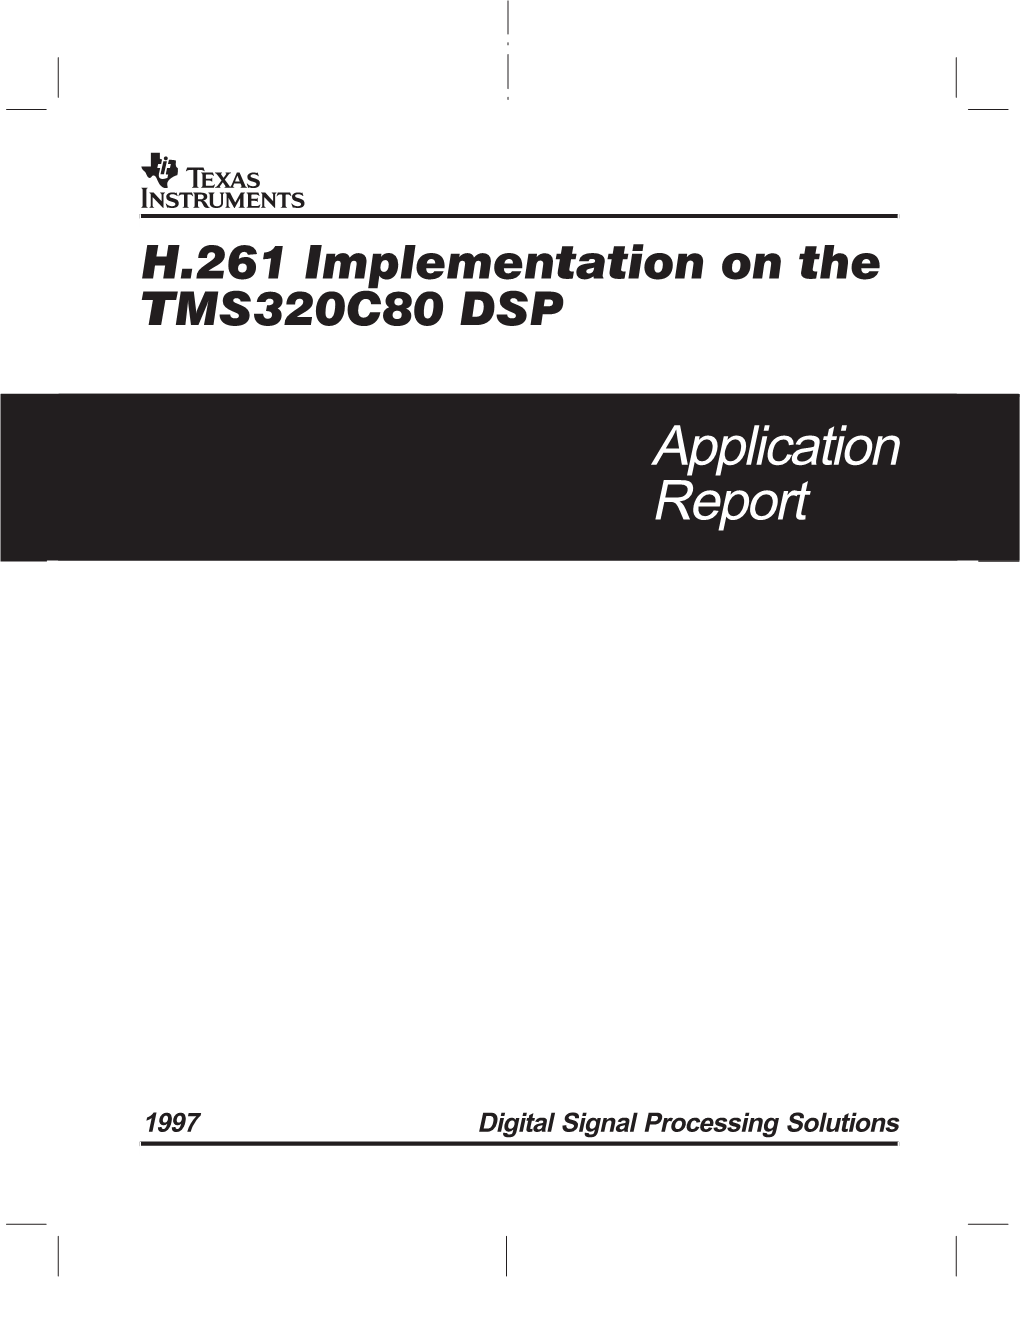 H.261 Implementation on the TMS320C80 DSP